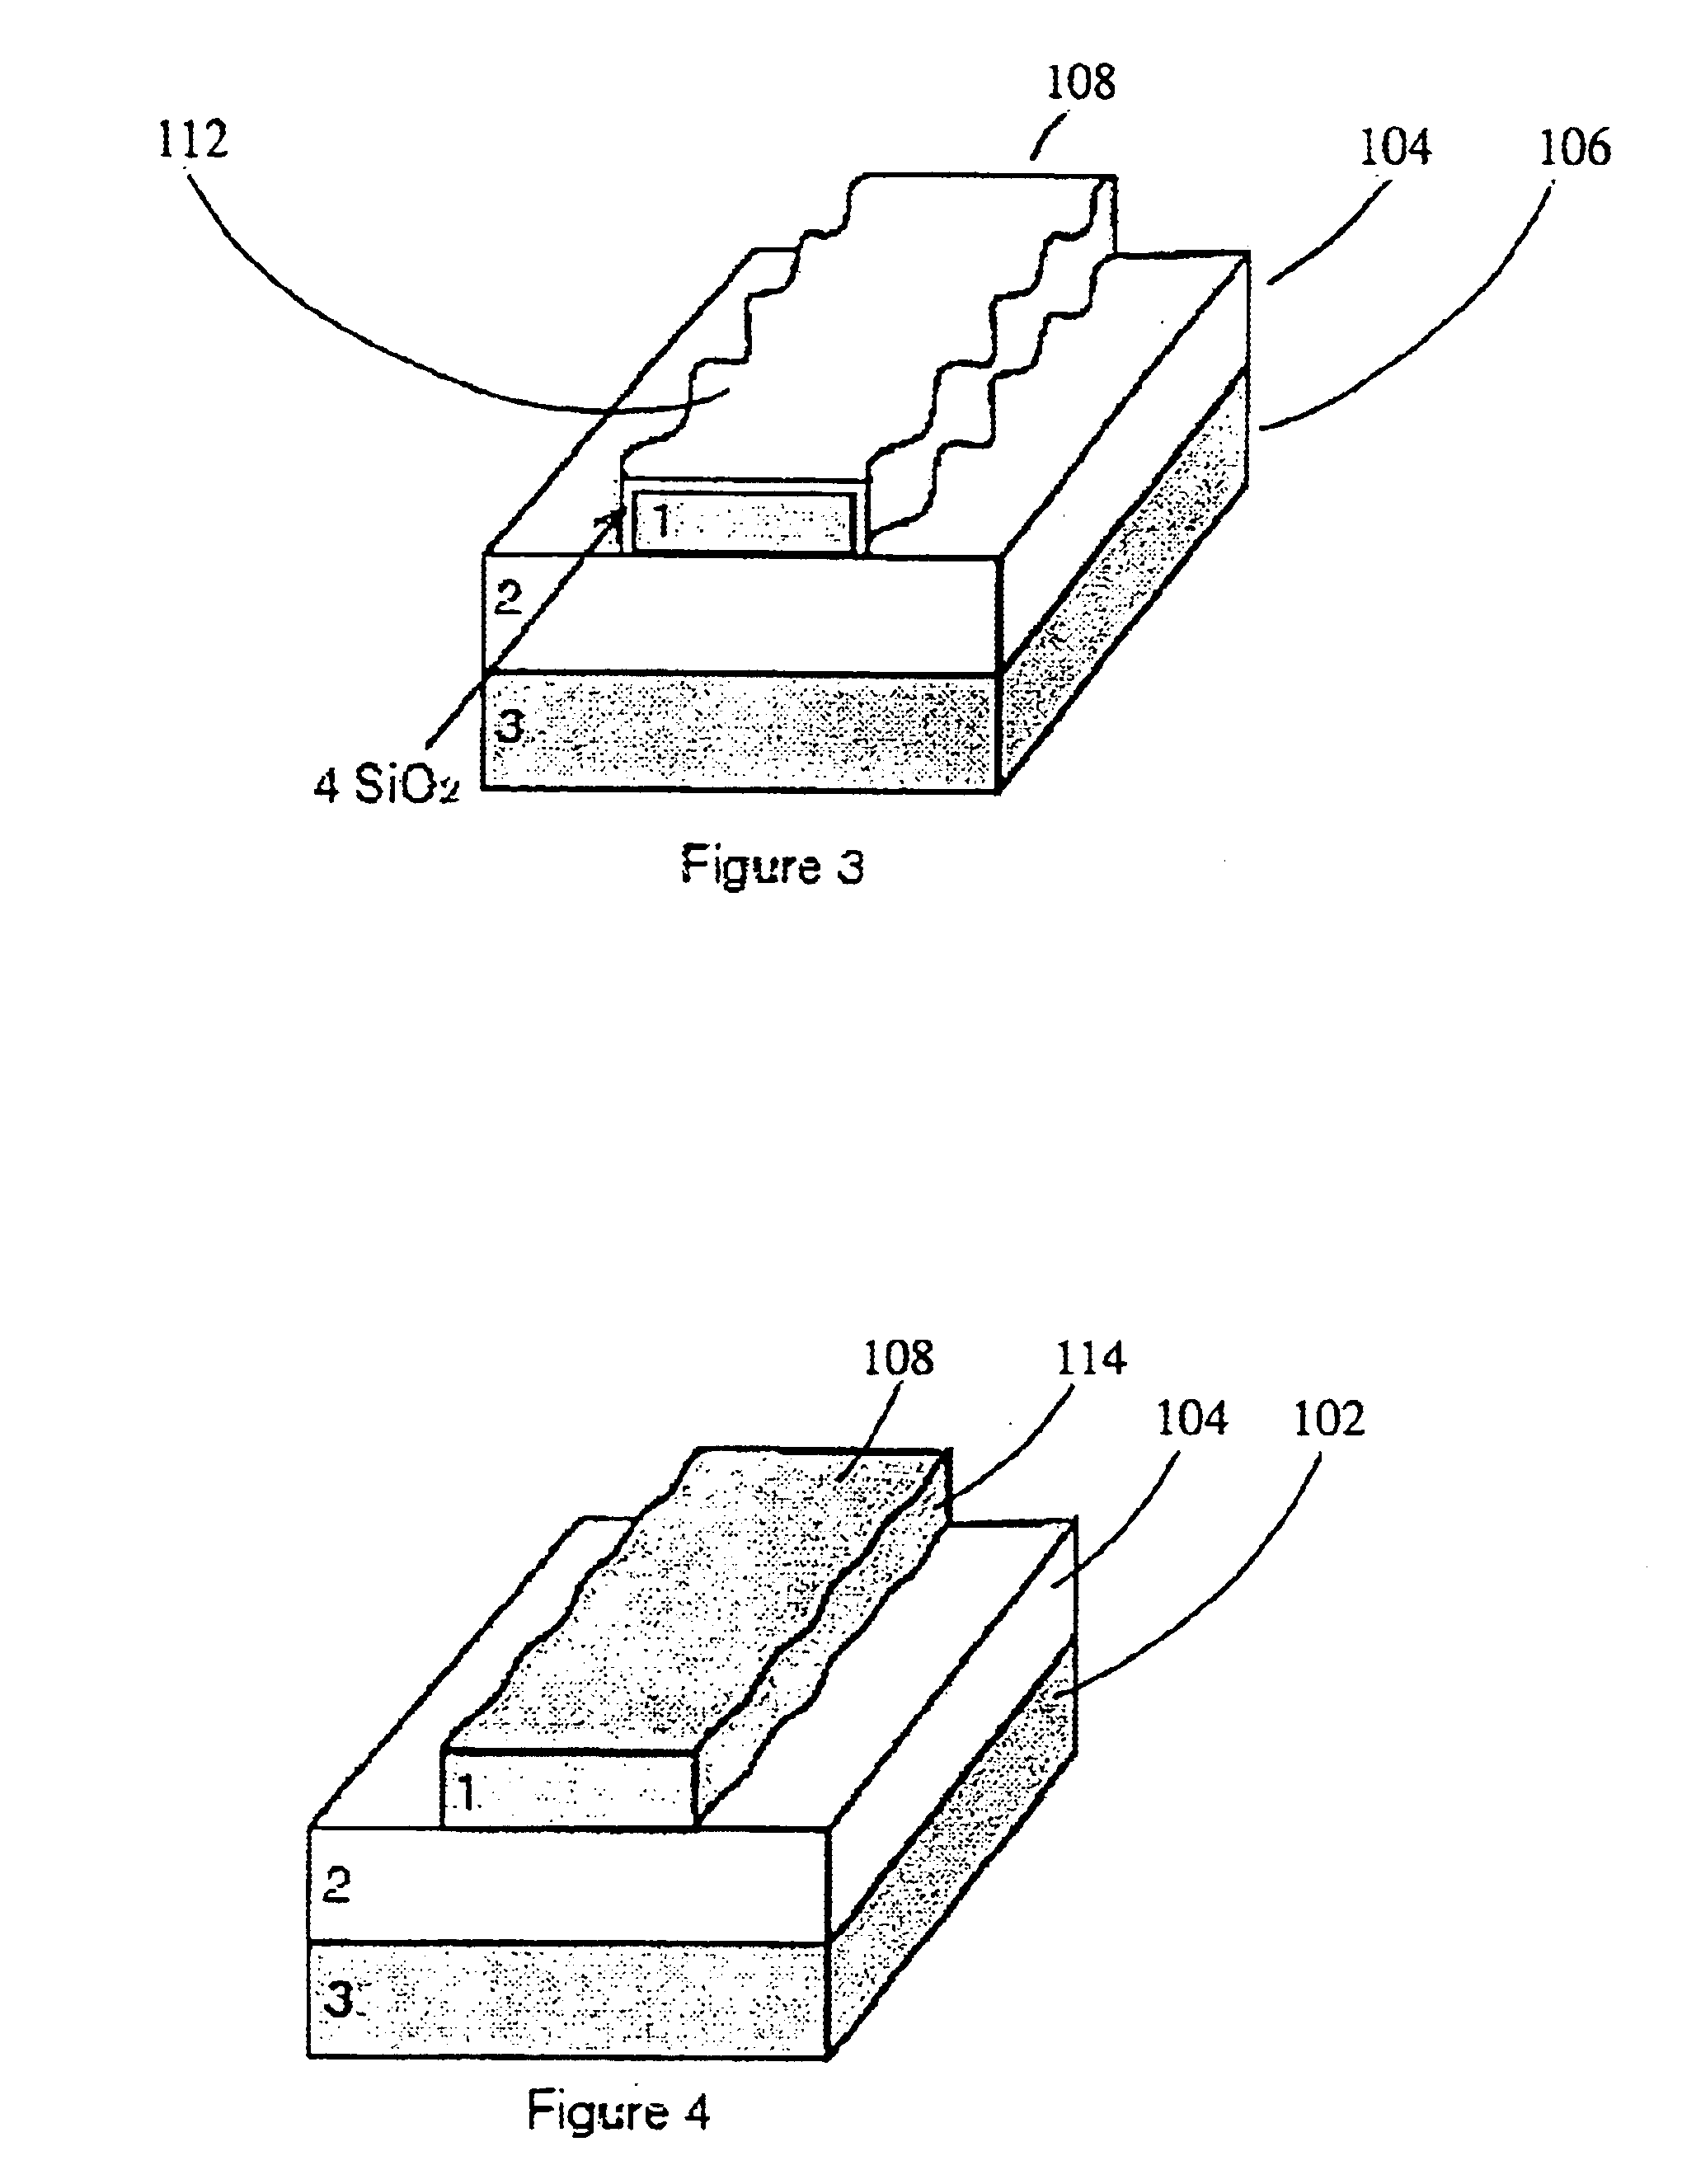 Low-loss waveguide and method of making same